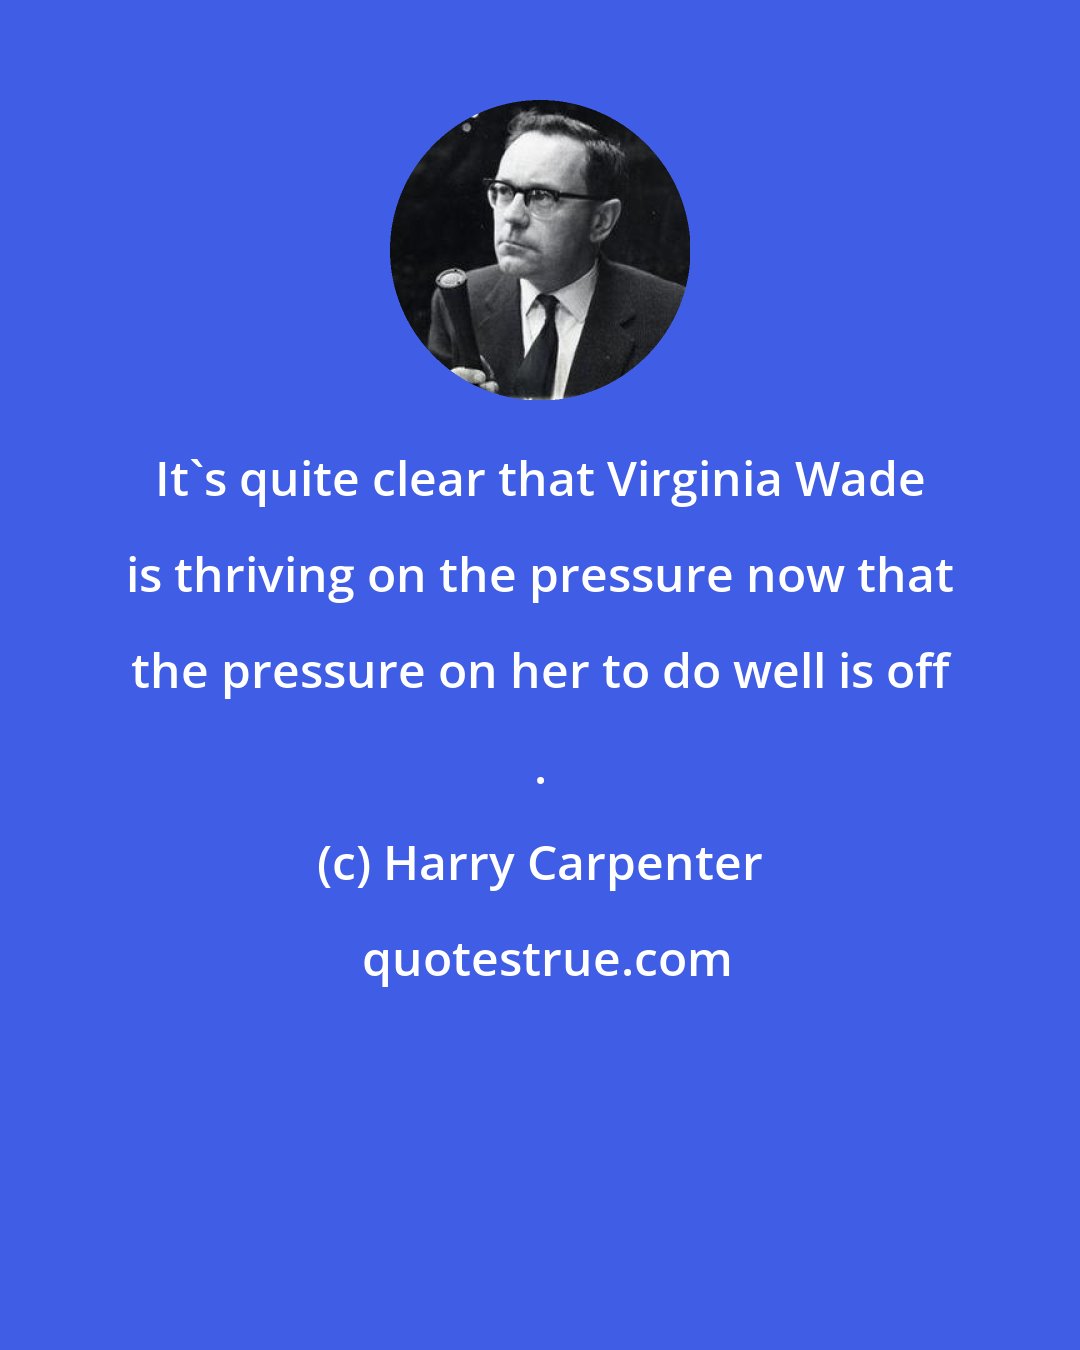 Harry Carpenter: It's quite clear that Virginia Wade is thriving on the pressure now that the pressure on her to do well is off .